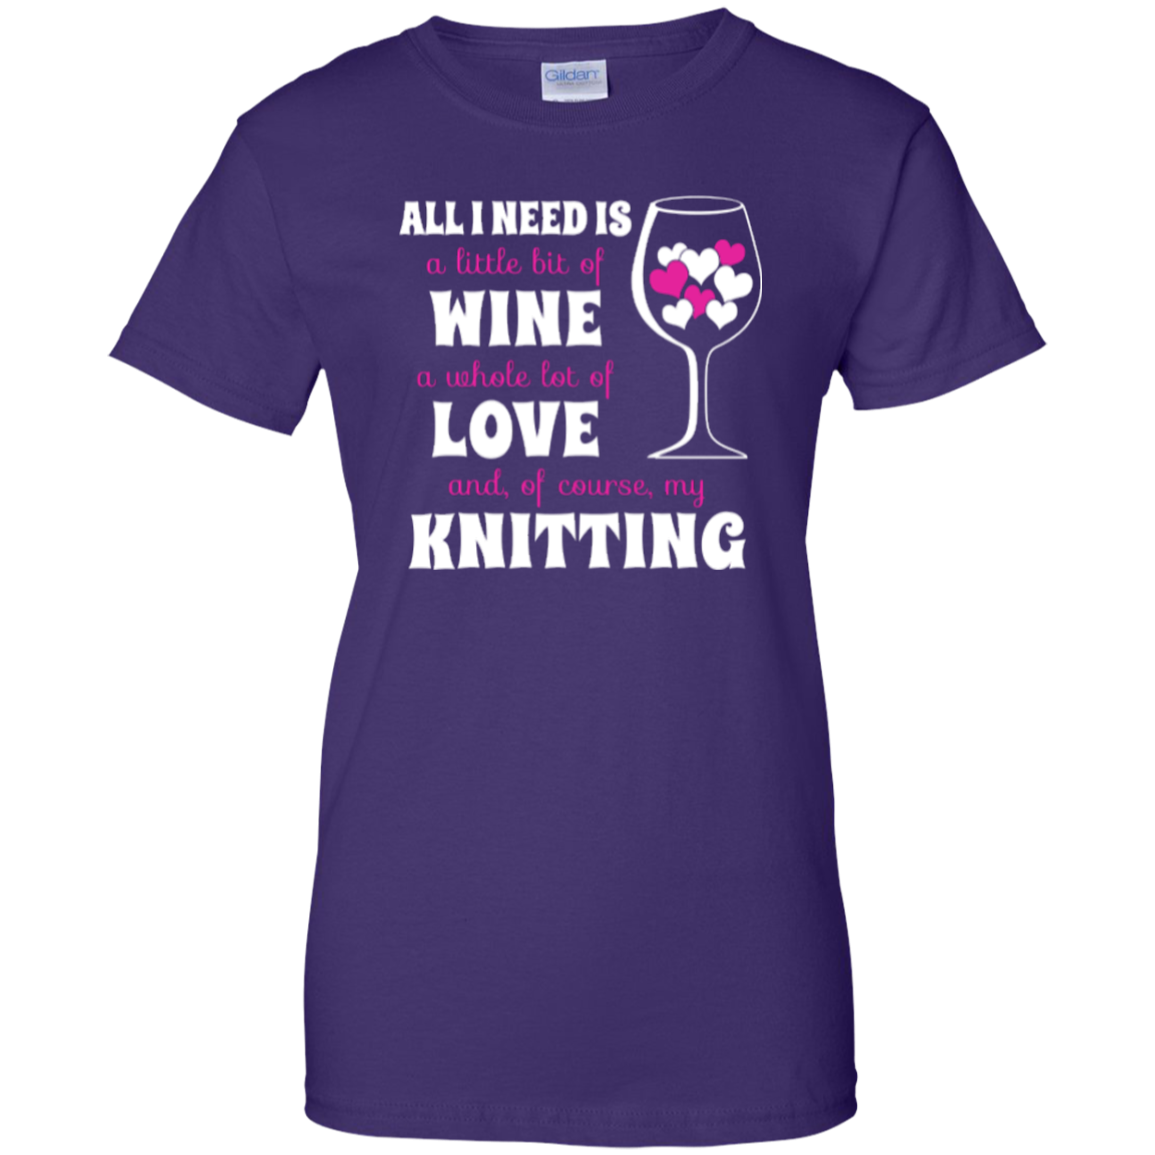 All I Need is Wine-Love-Knitting Ladies Custom 100% Cotton T-Shirt - Crafter4Life - 9